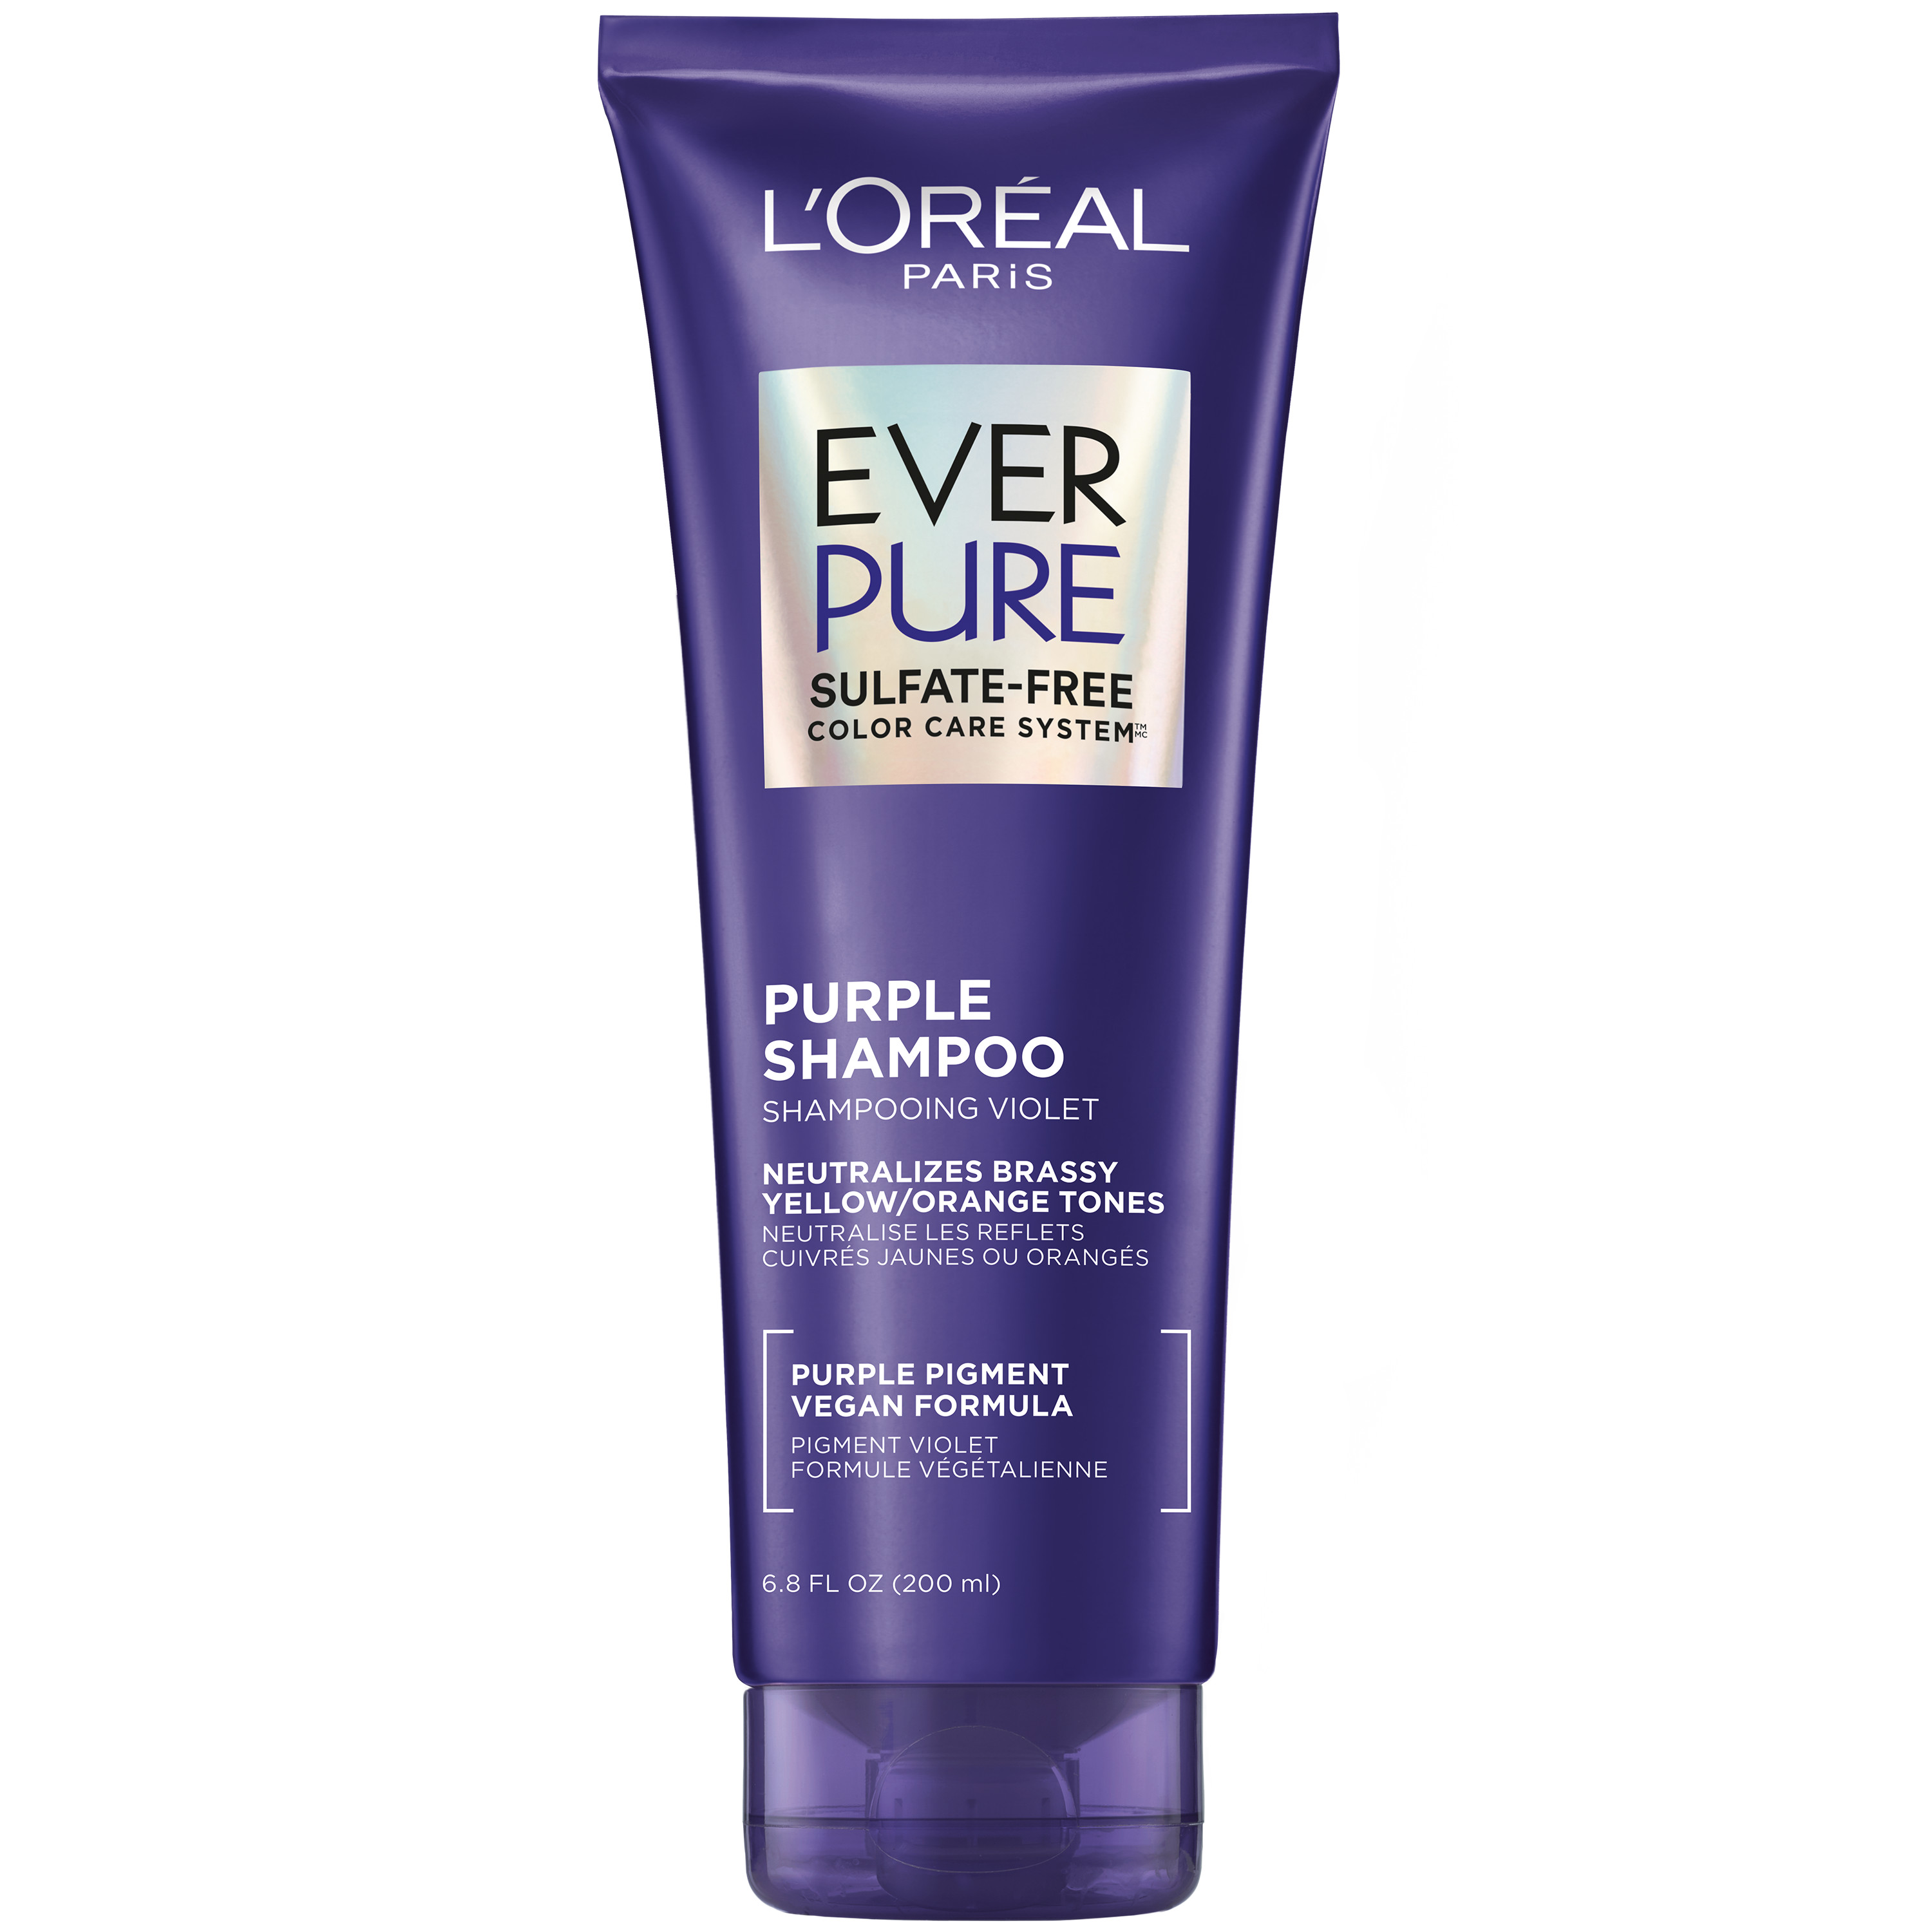 L'Oreal Paris Sulfate Free Purple Shampoo for Toning Blonde and Bleached Hair, EverPure 6.8 fl oz - image 1 of 11